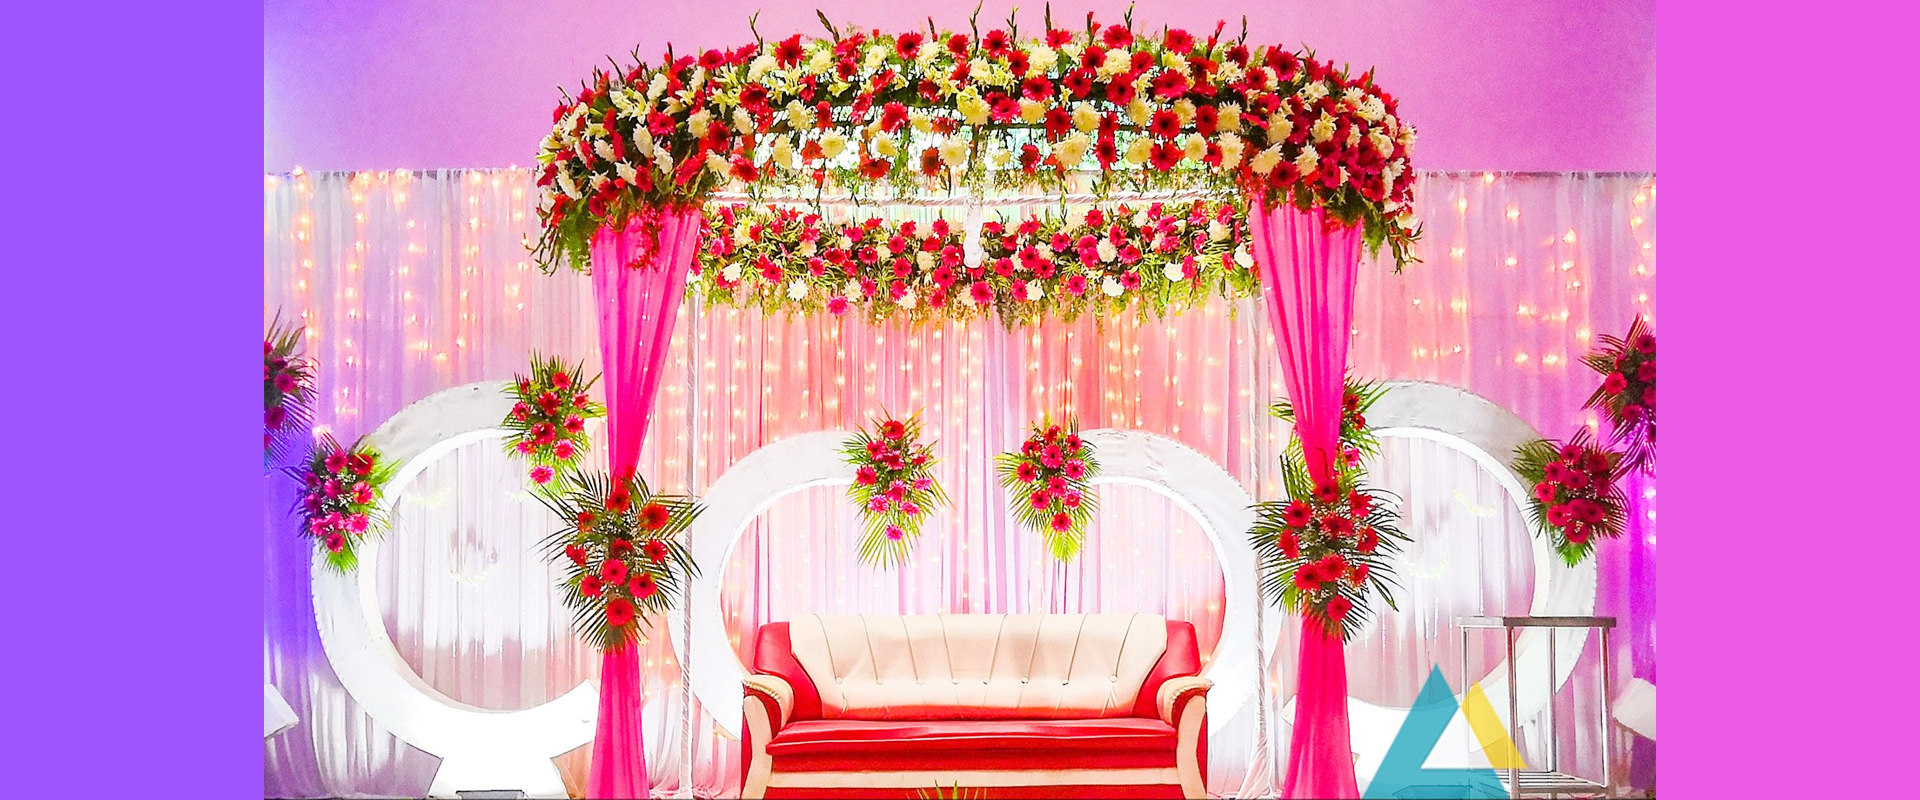 Decorative flower arches backdrops for weddings ceremonies
